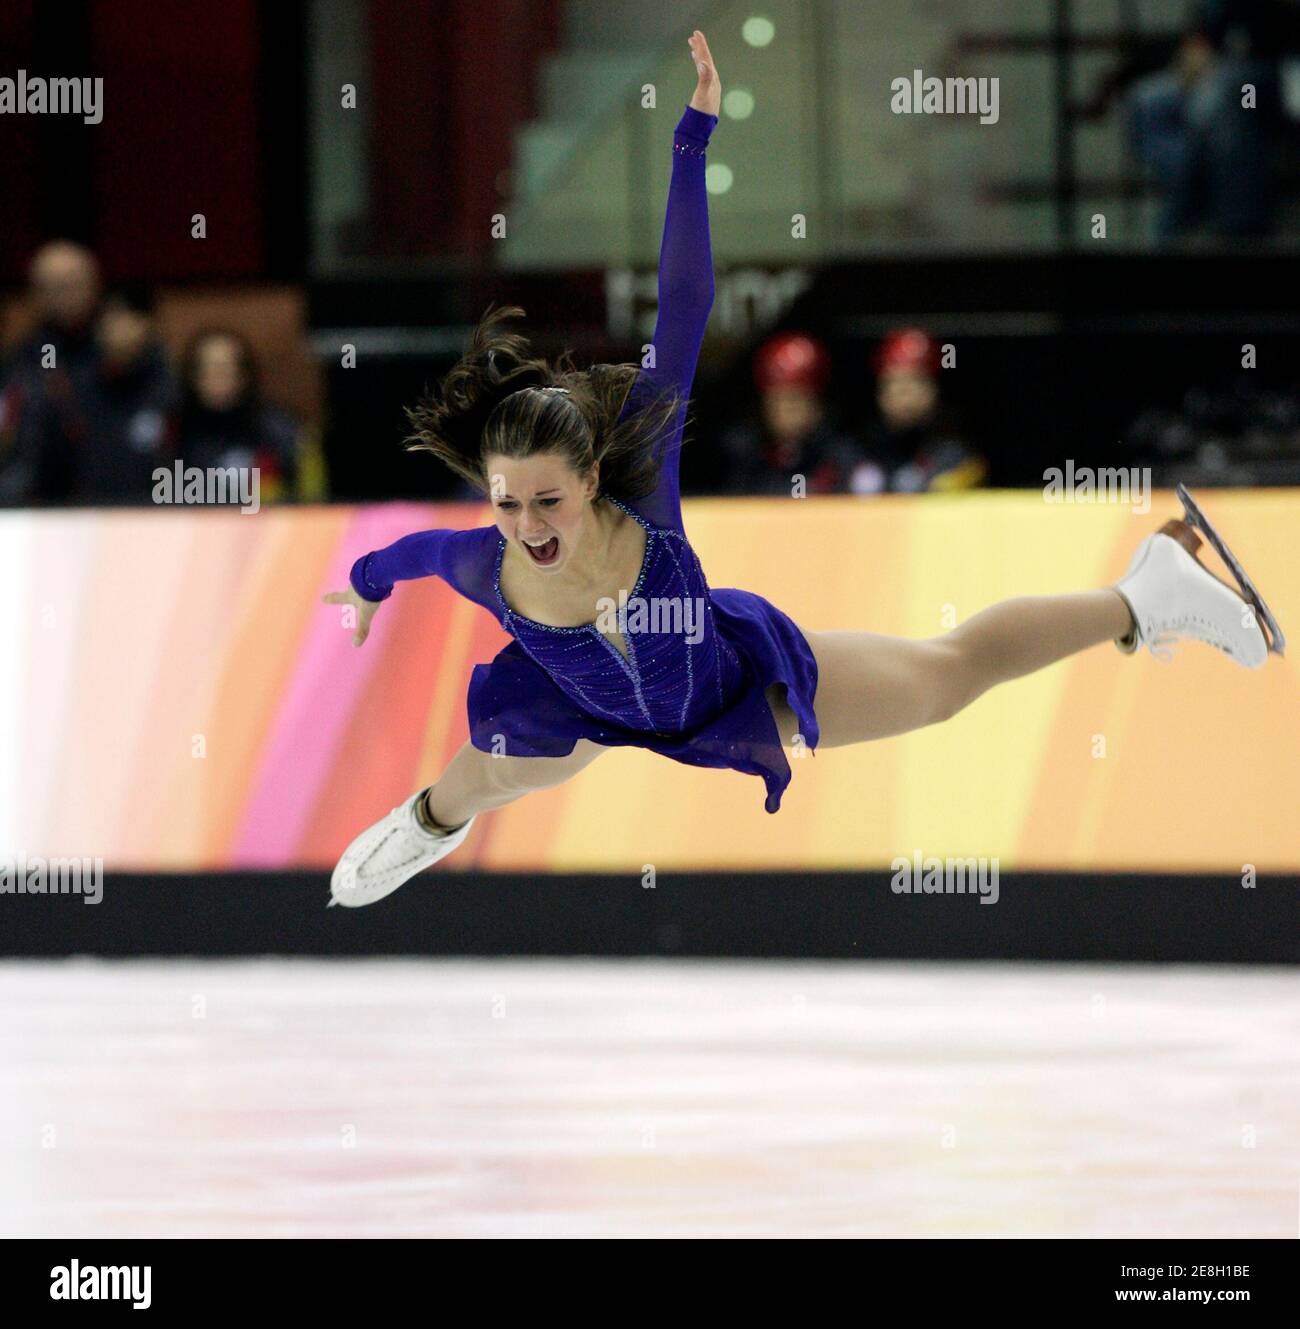 Emily Hughes from the United States performs in the women's short program during the Figure Skating competition at the Torino 2006 Winter Olympic Games in Turin, Italy, February 21, 2006.     REUTERS/Andy Clark Stock Photo